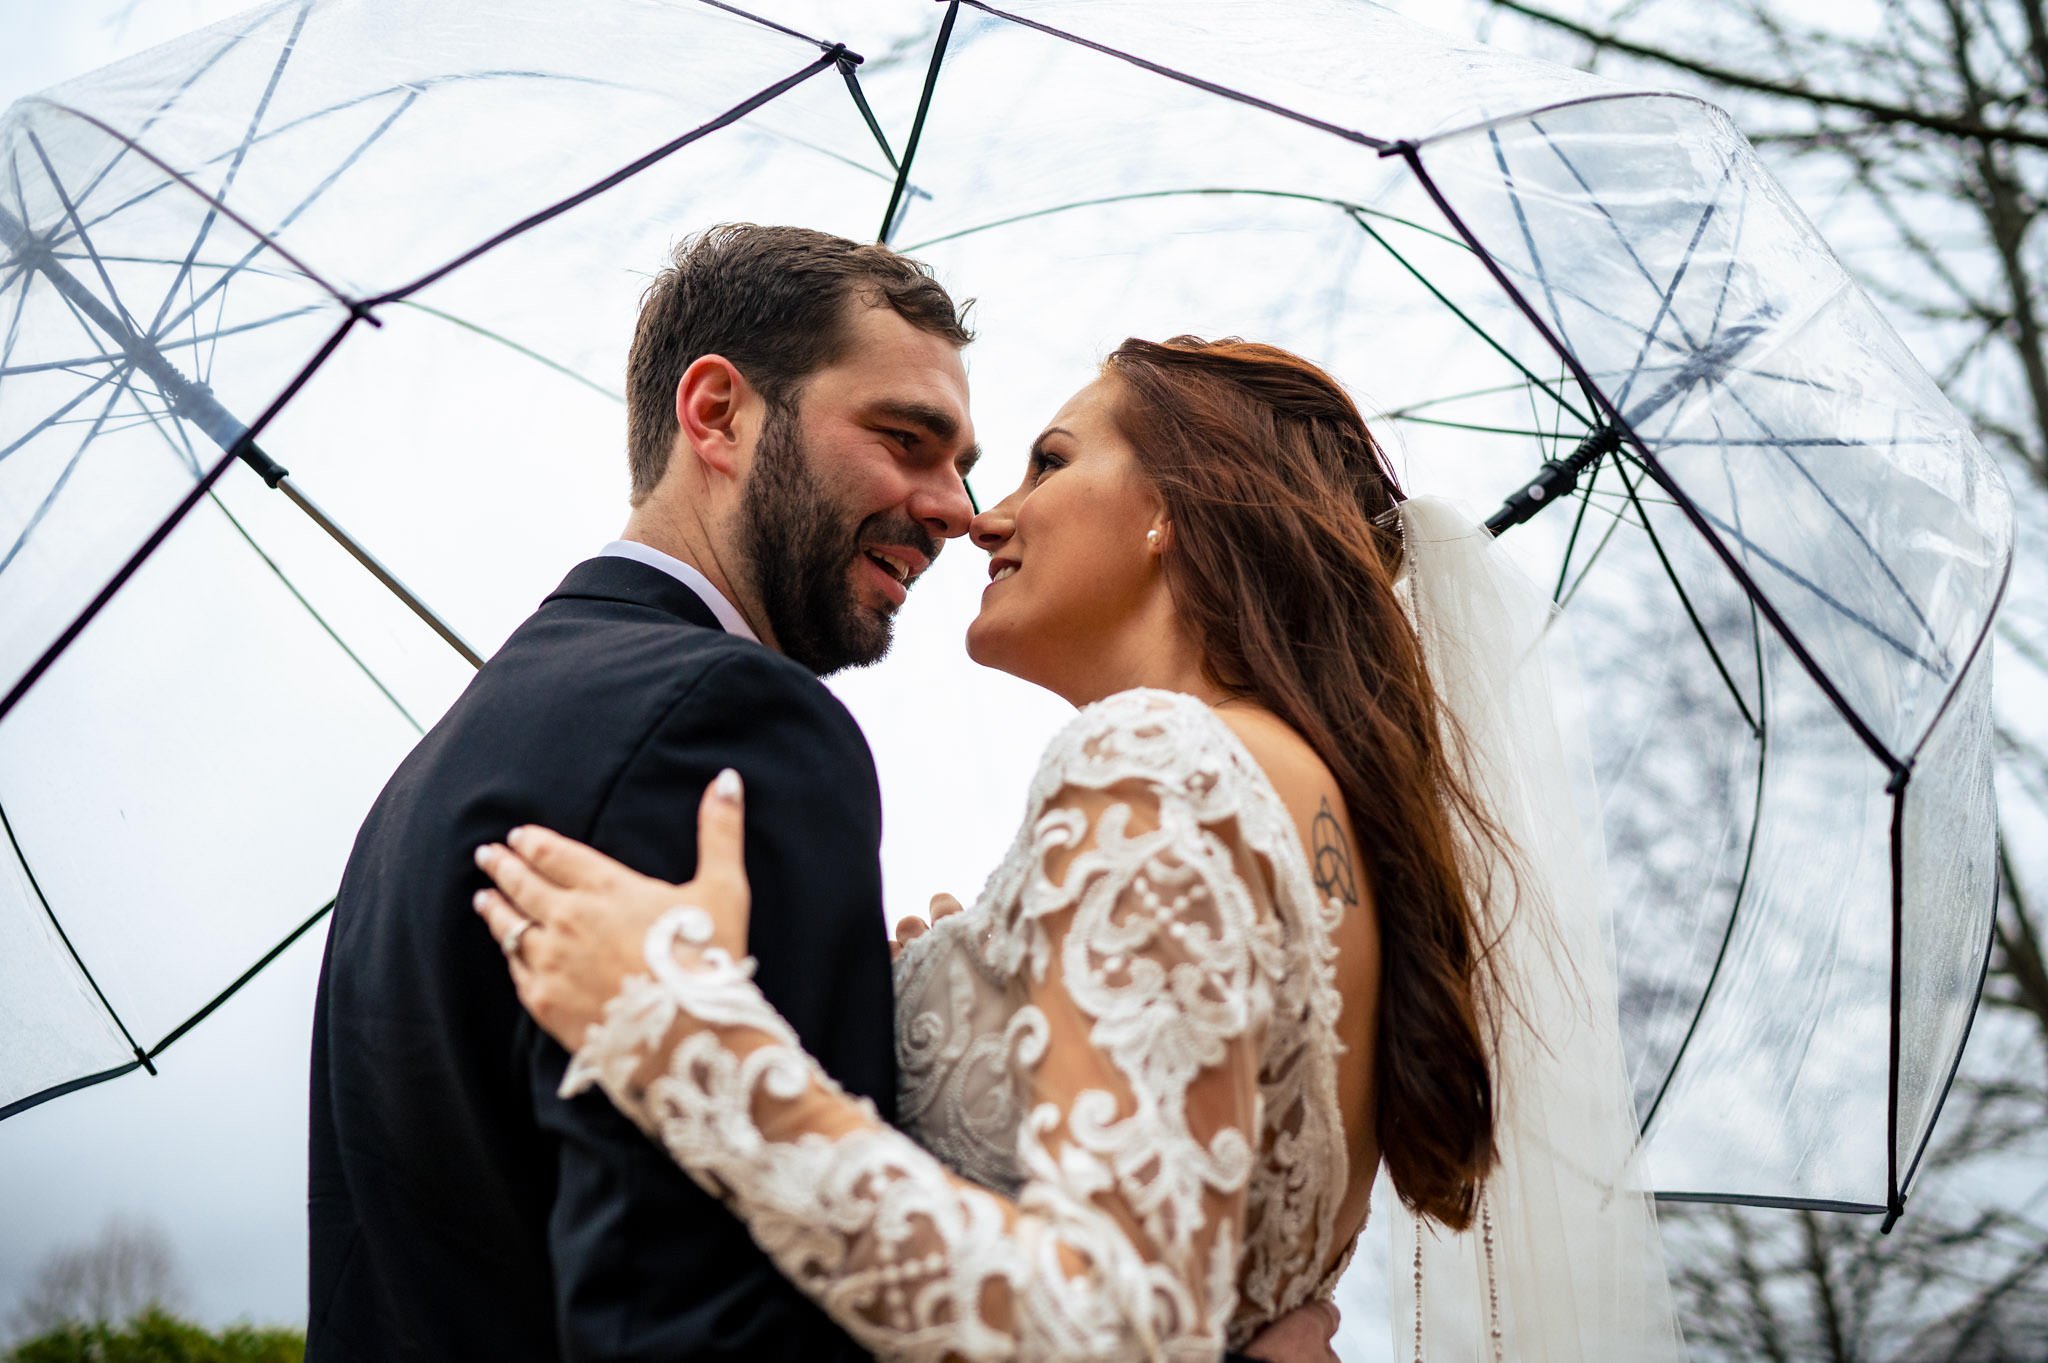 A bride and groom kiss under an umbrella at a wedding in Asheville, NC.